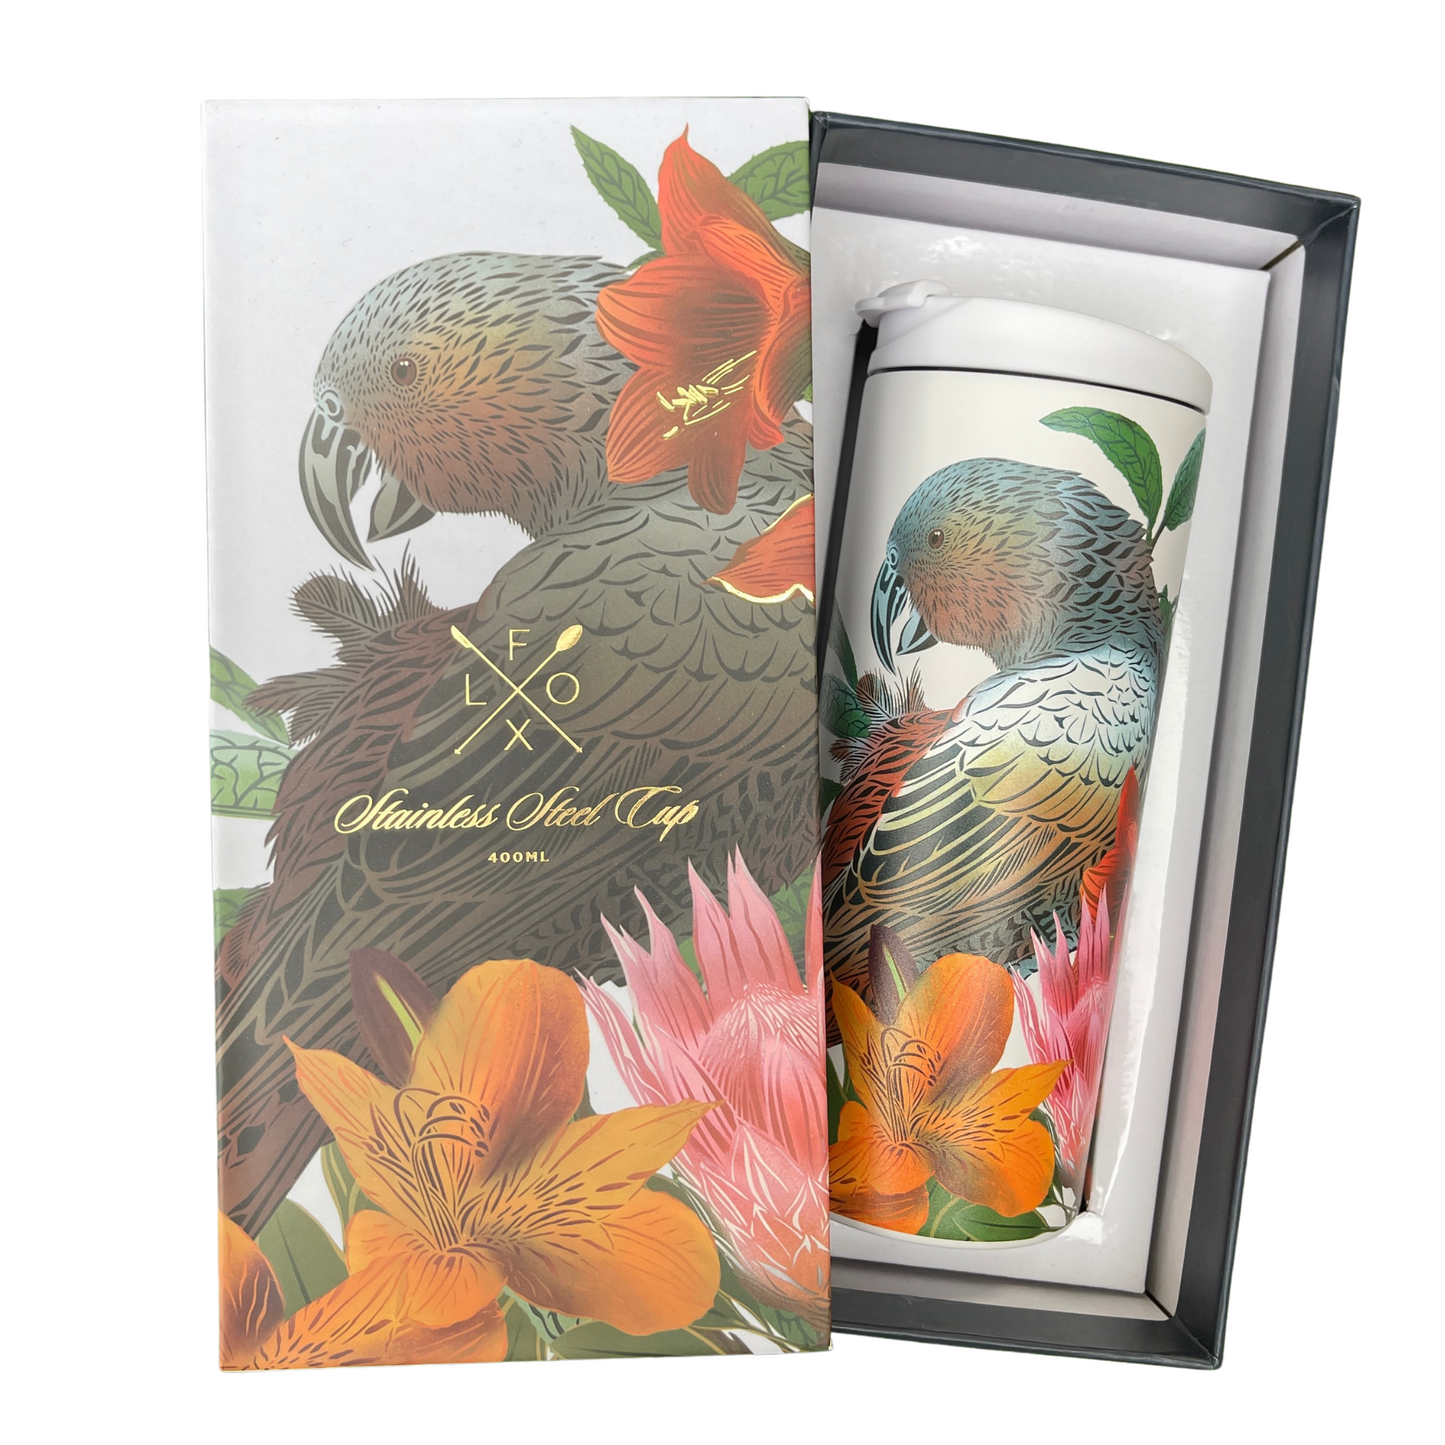 Stainless steel cup with Kaka bird and floral artwork by designer Flox sitting in a deluxe box featuring the same design.